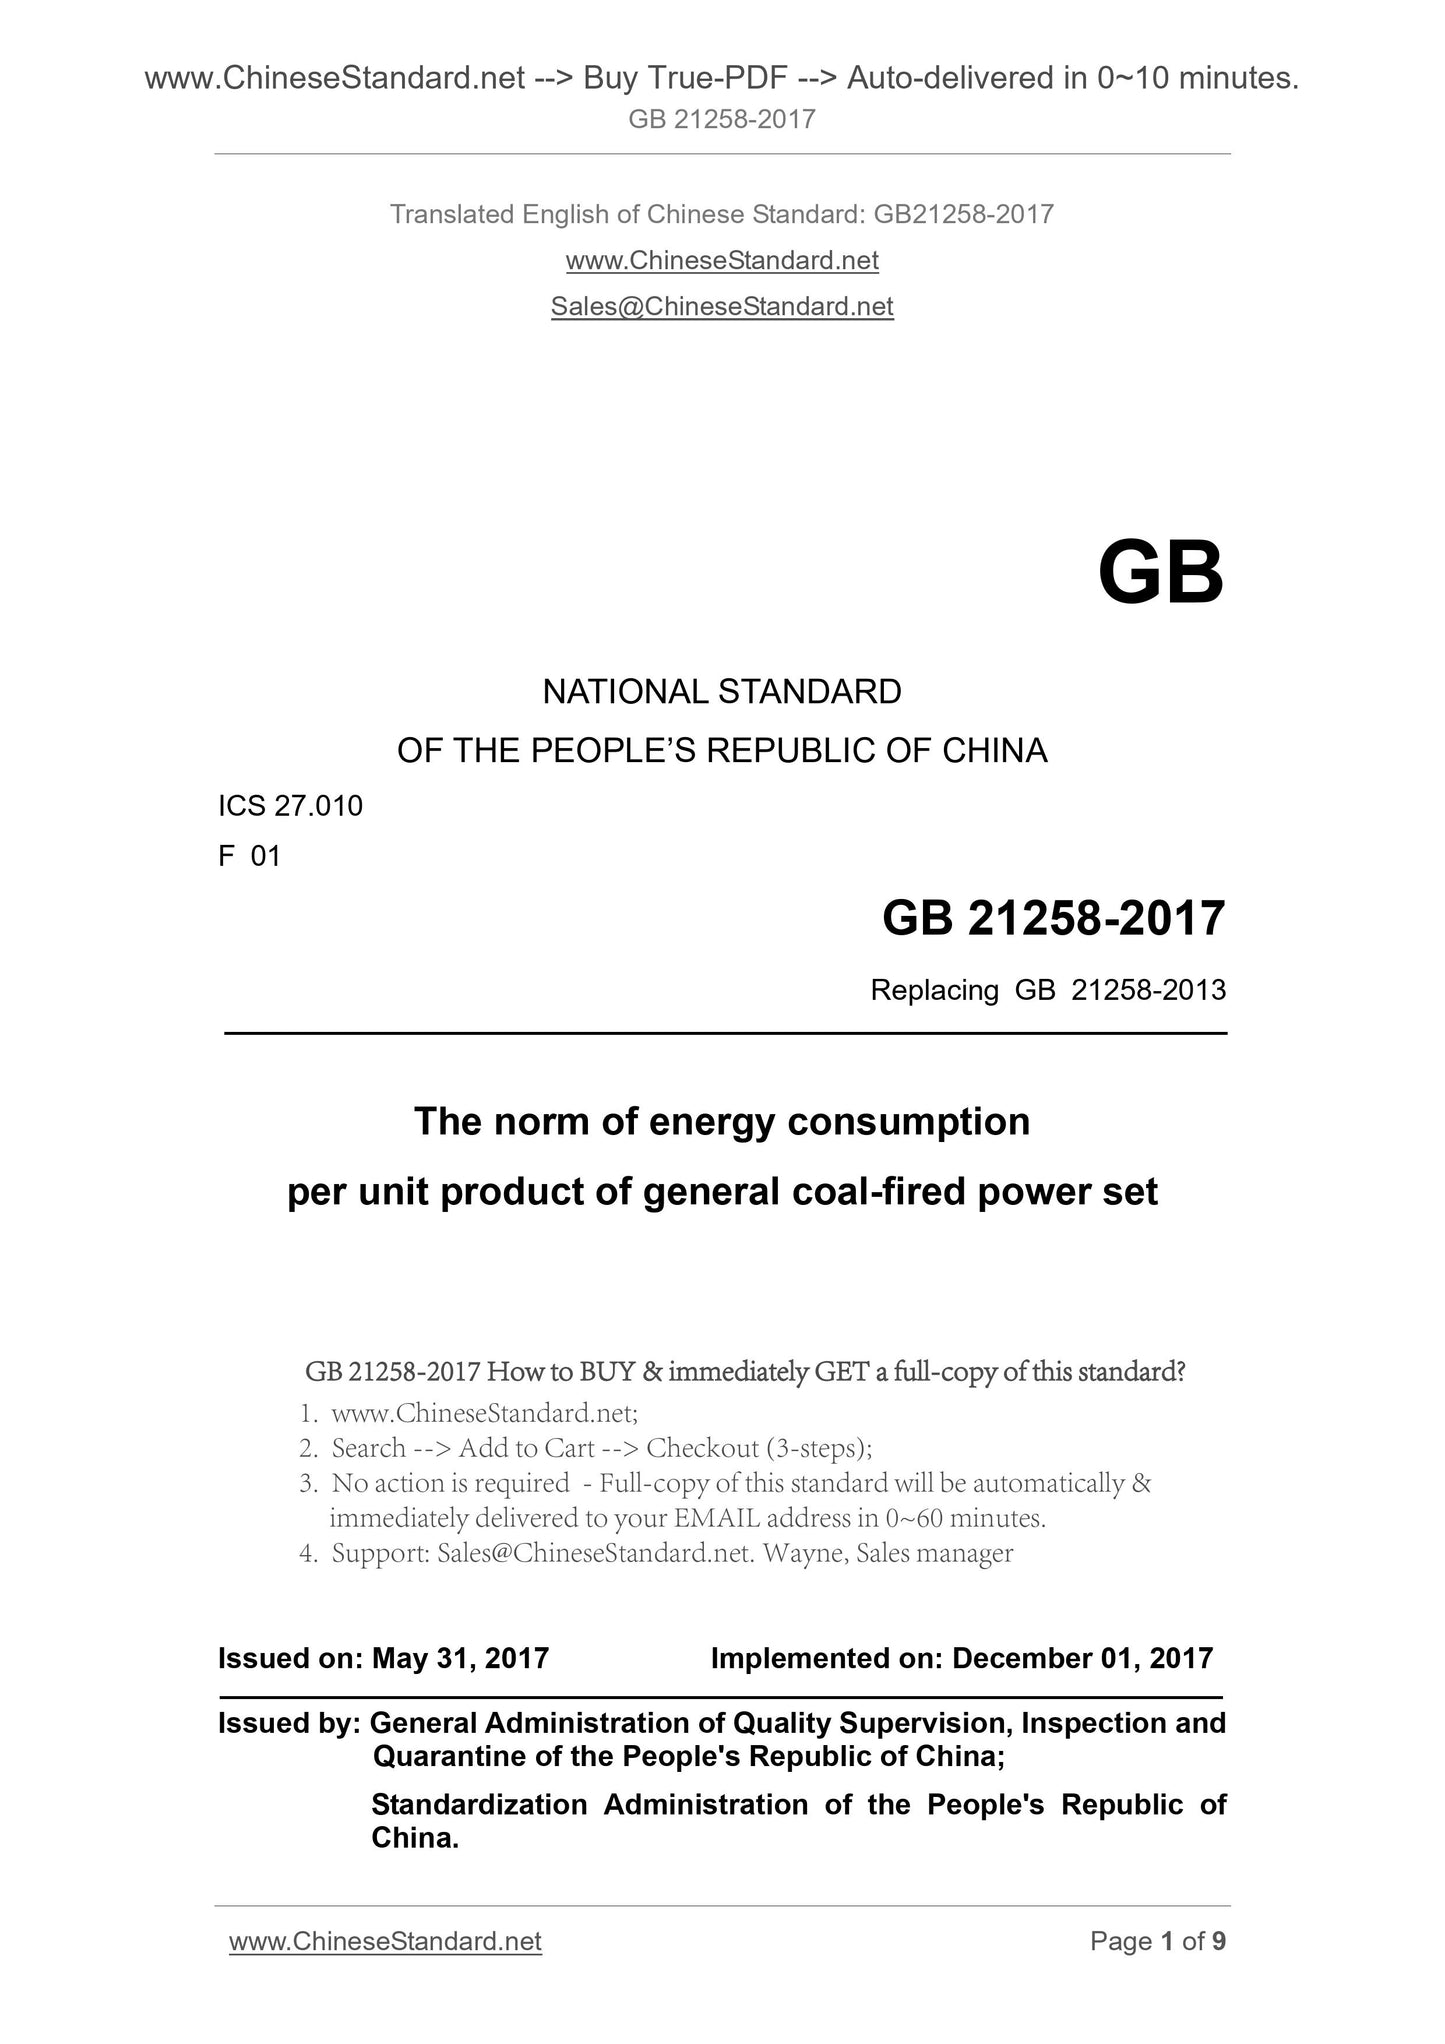 GB 21258-2017 Page 1